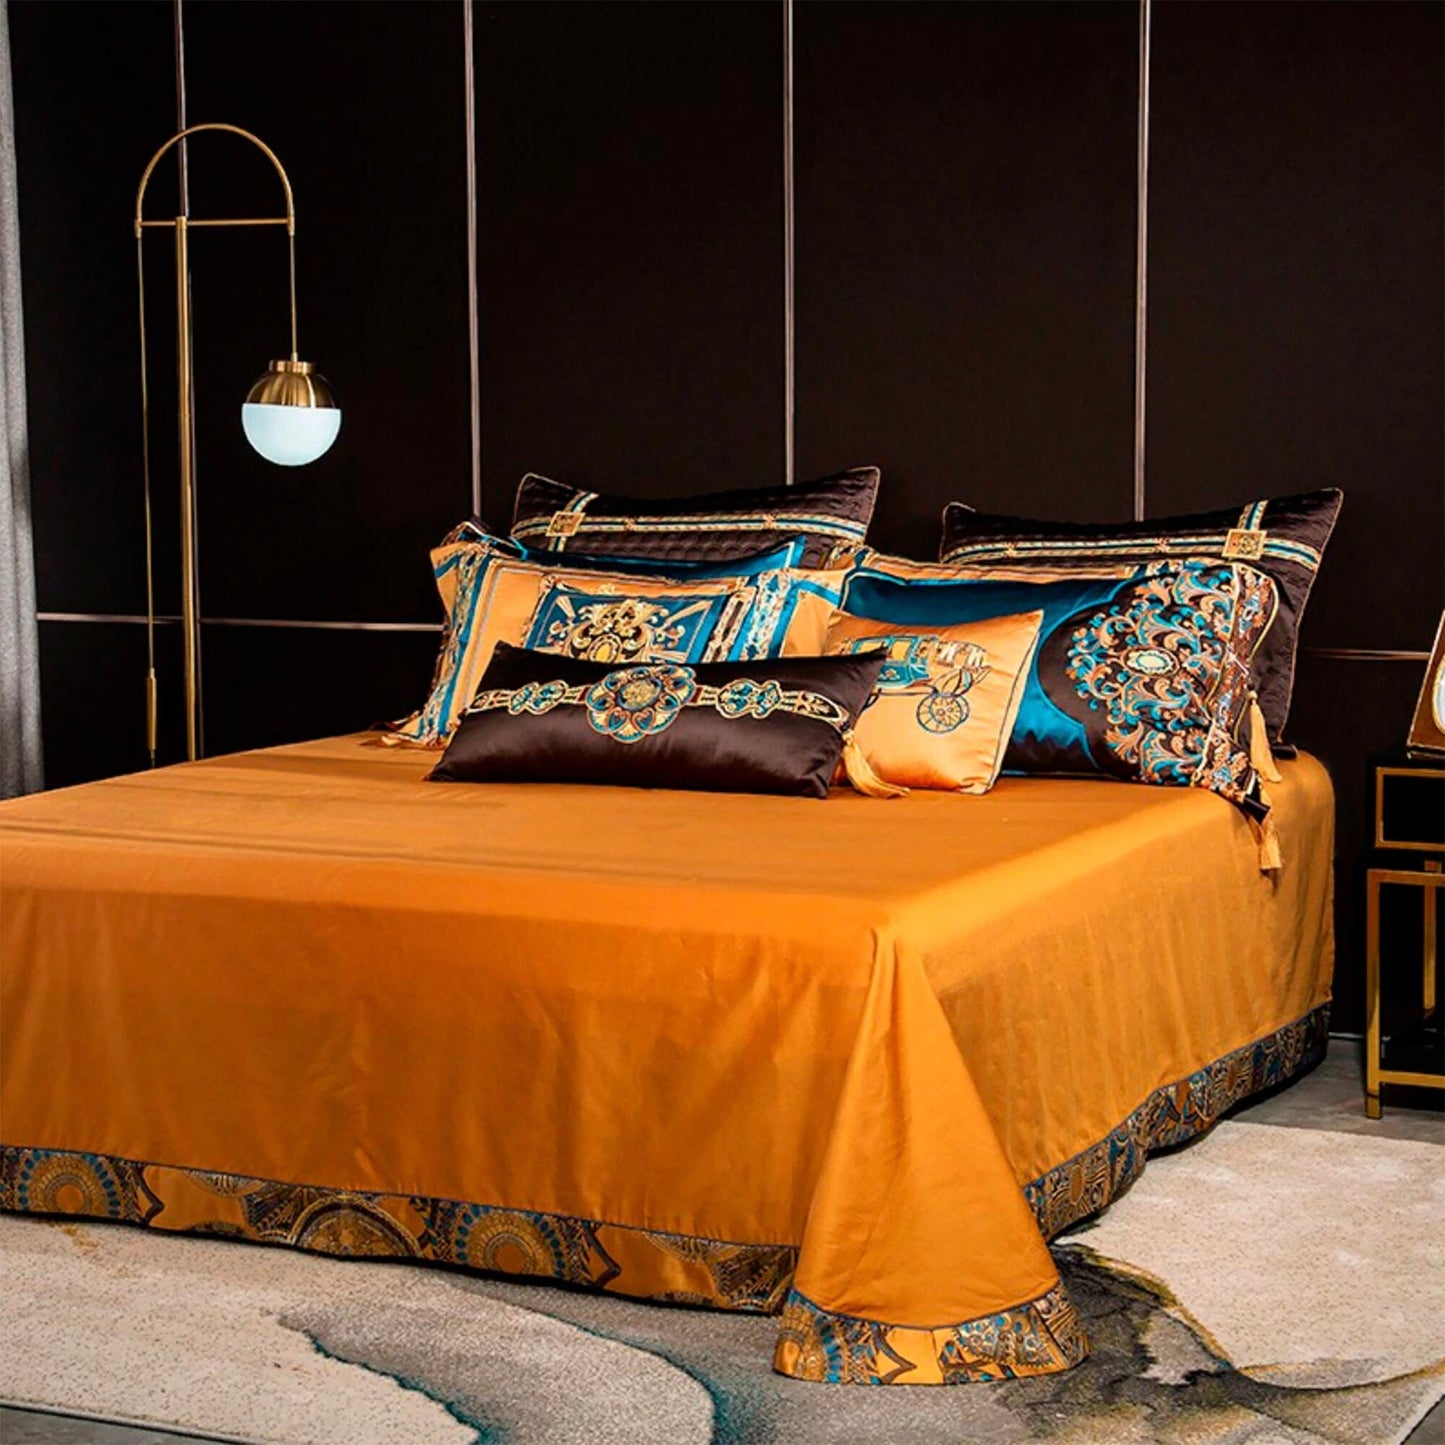 Luxury Premium Large Jacquard with Embroidery Golden Baroque style design Bedding Set  • 4/6/10/12 PCS